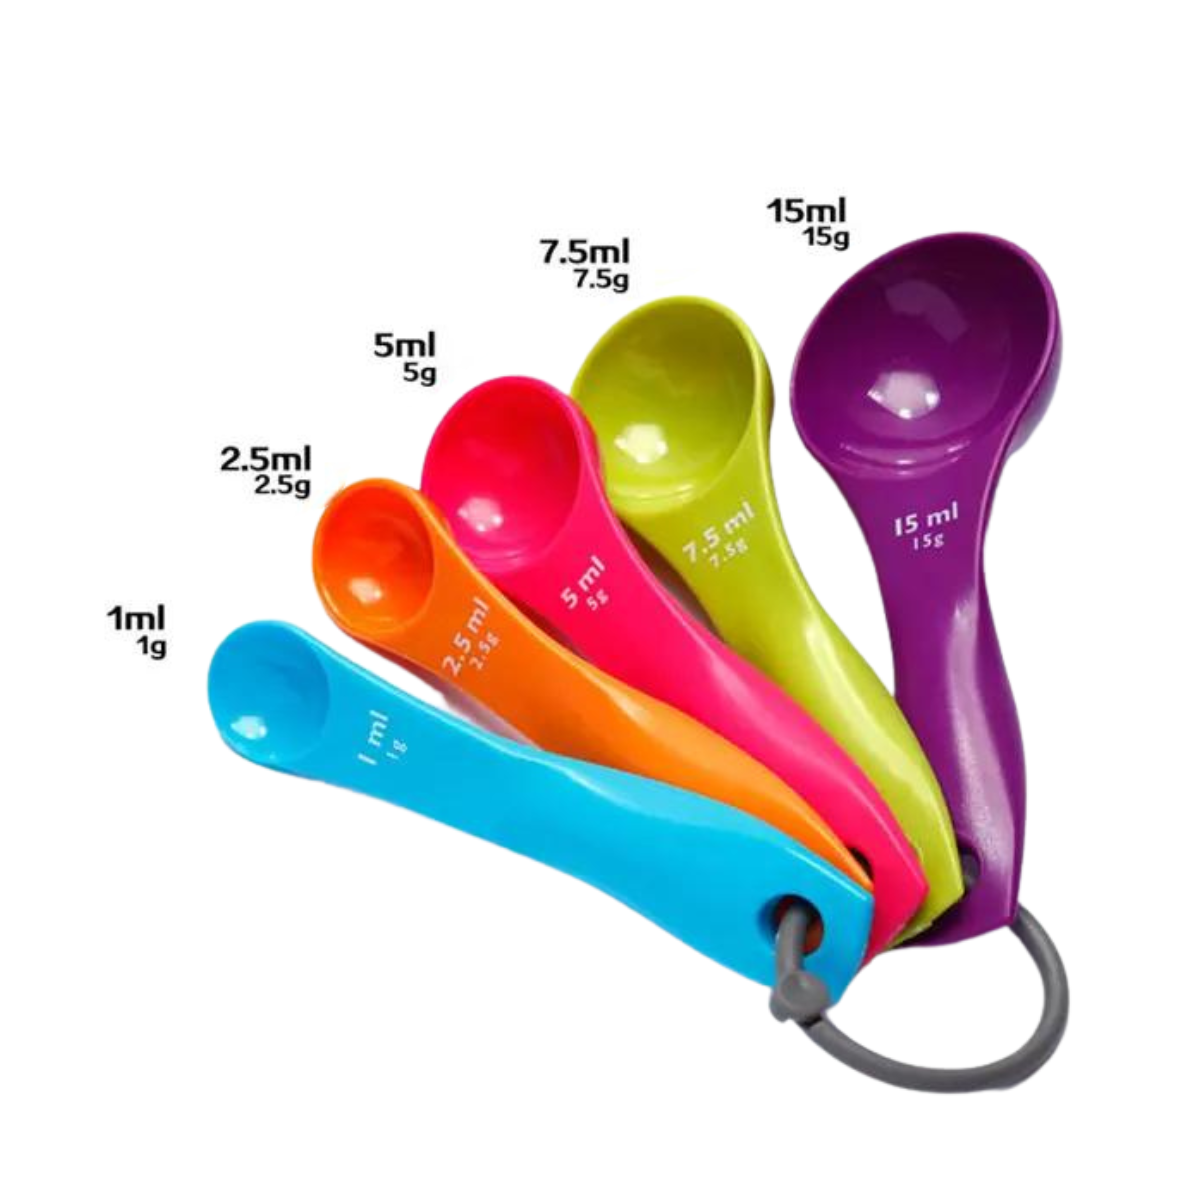 http://macsenlab.com/wp-content/uploads/2022/12/Measuring-spoon.png